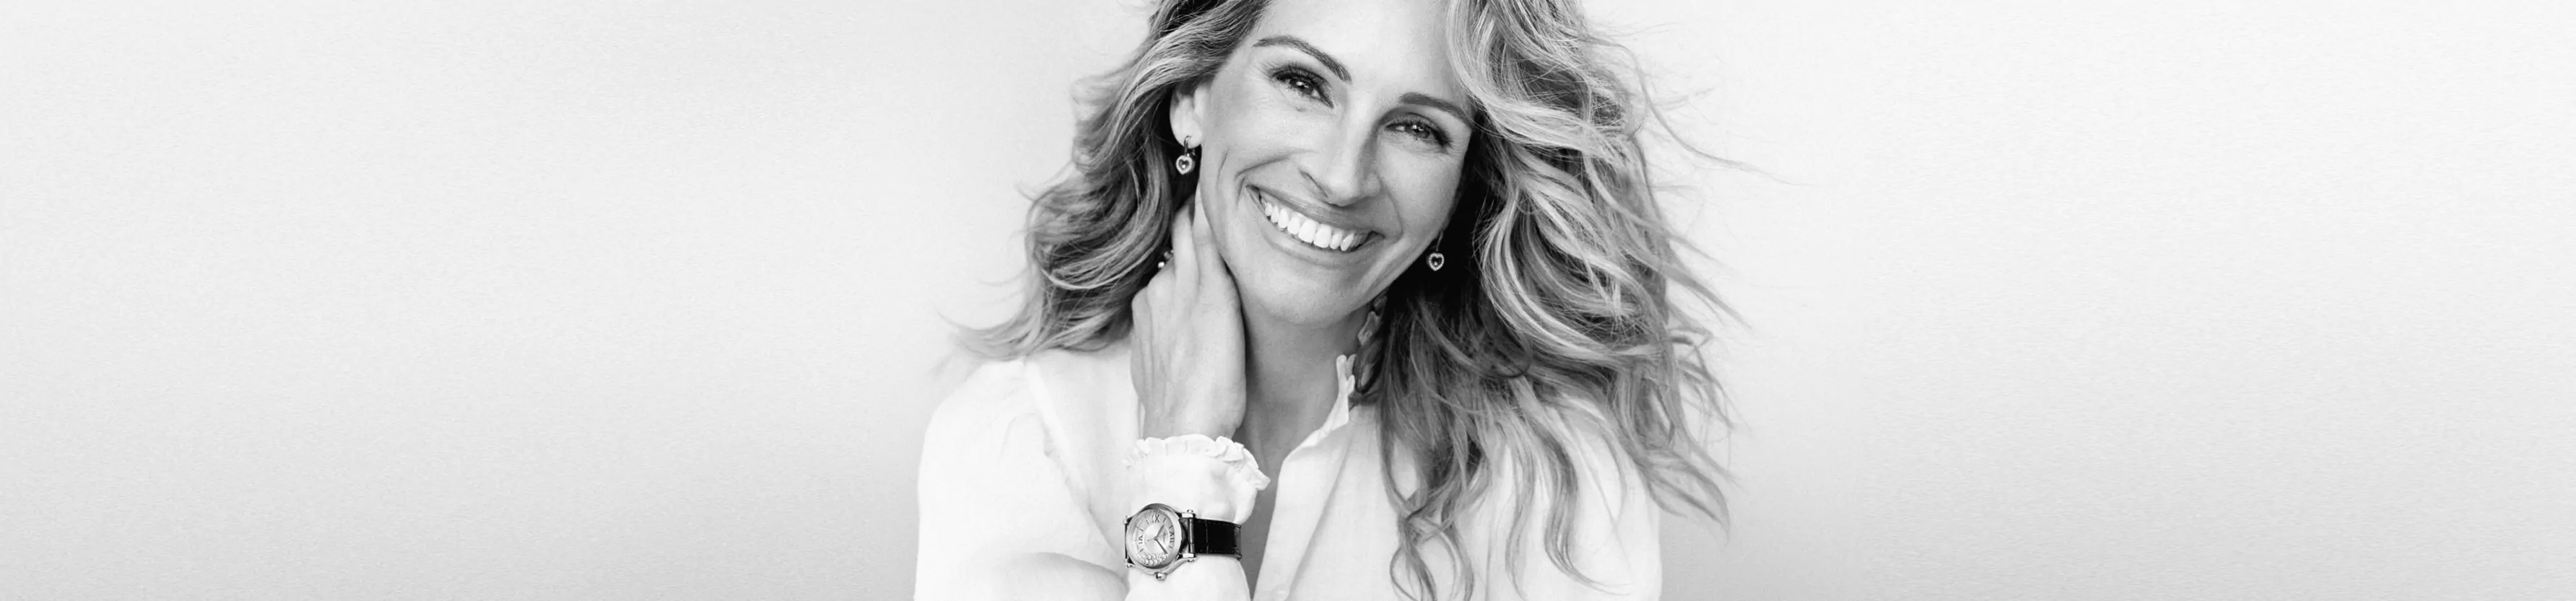 Chopard Enlists The World’s Most Iconic Smile For Happy Diamonds 2021